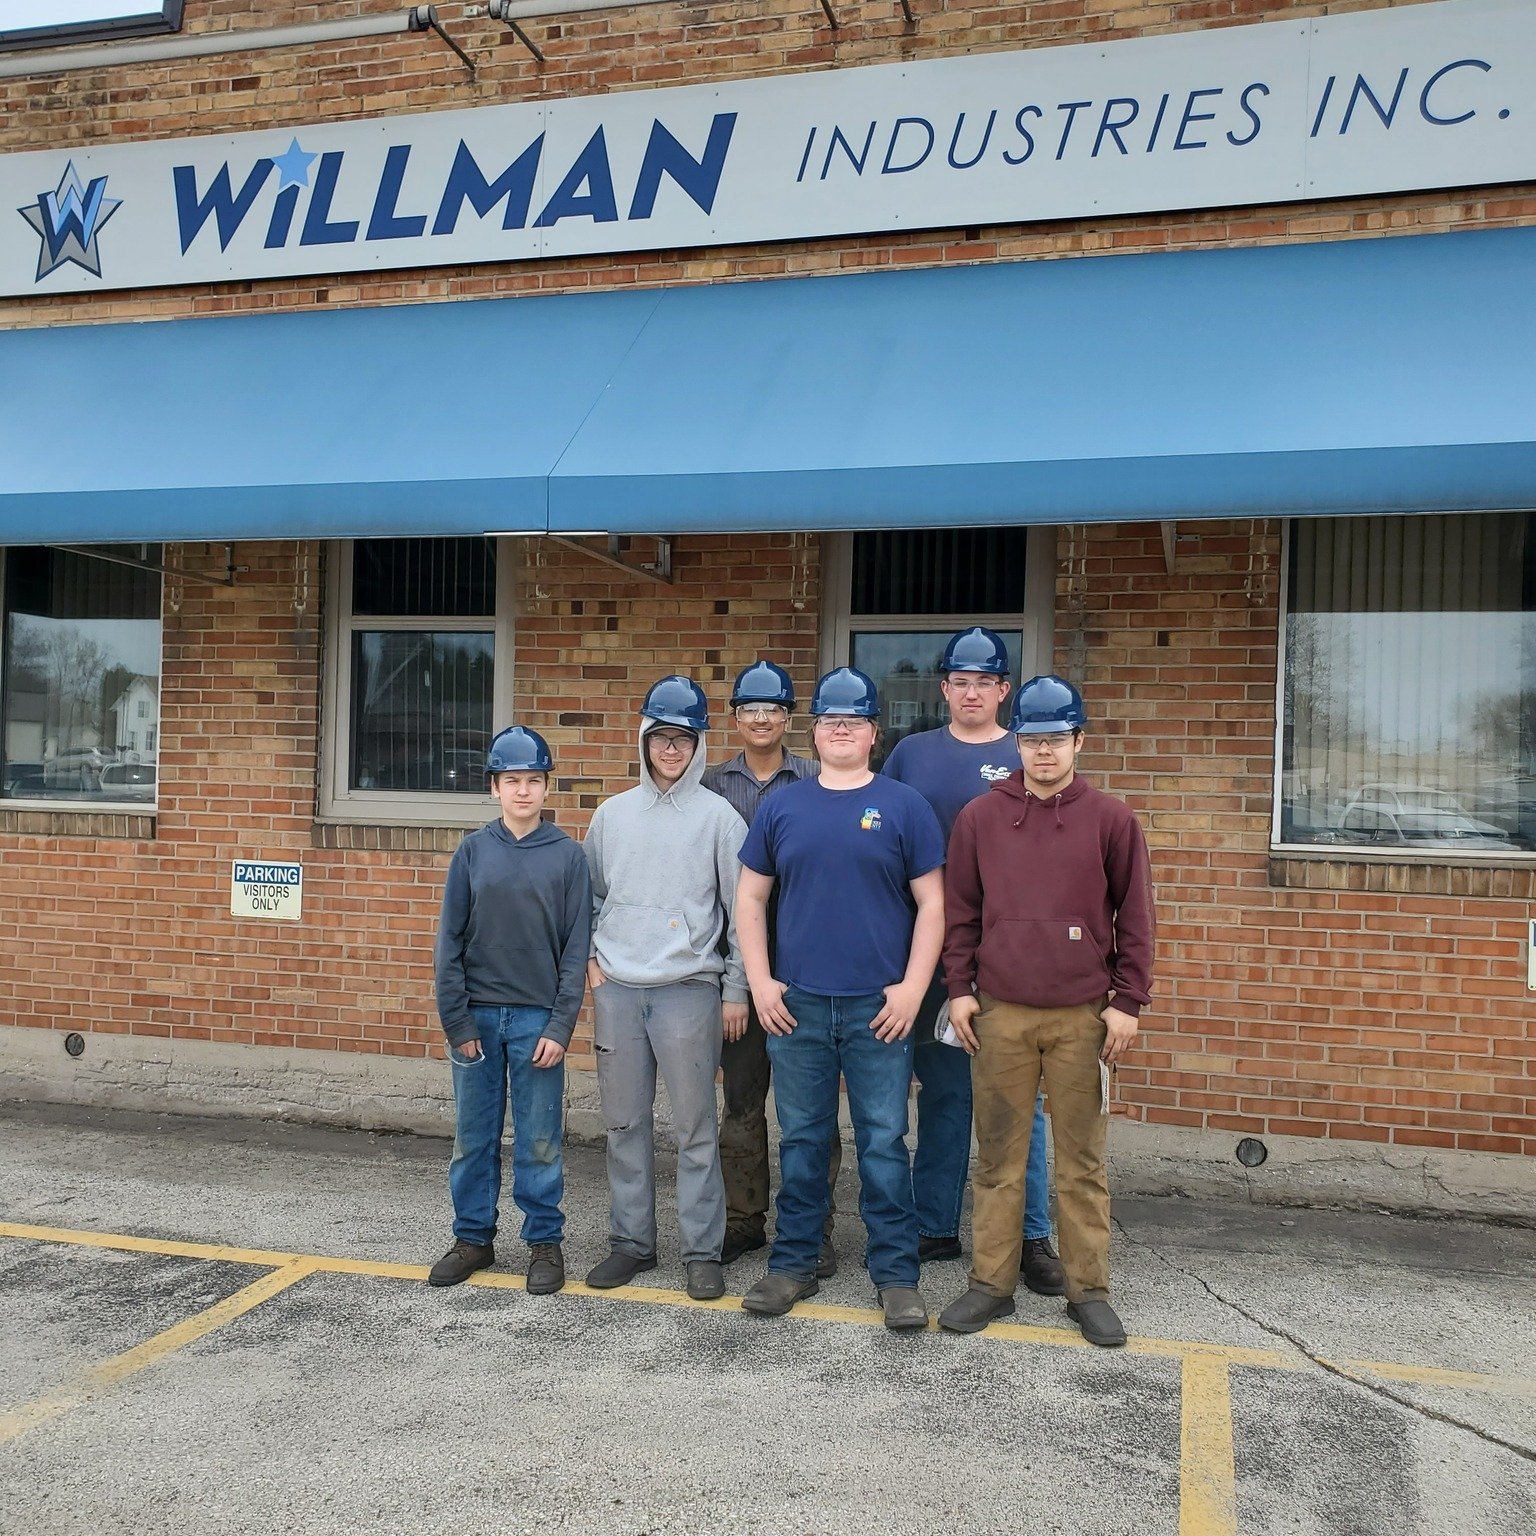 We really enjoyed our Tour-It-Tuesday at Willman Industries Inc.  Most of us knew little about casting, so it was an insightful opportunity.